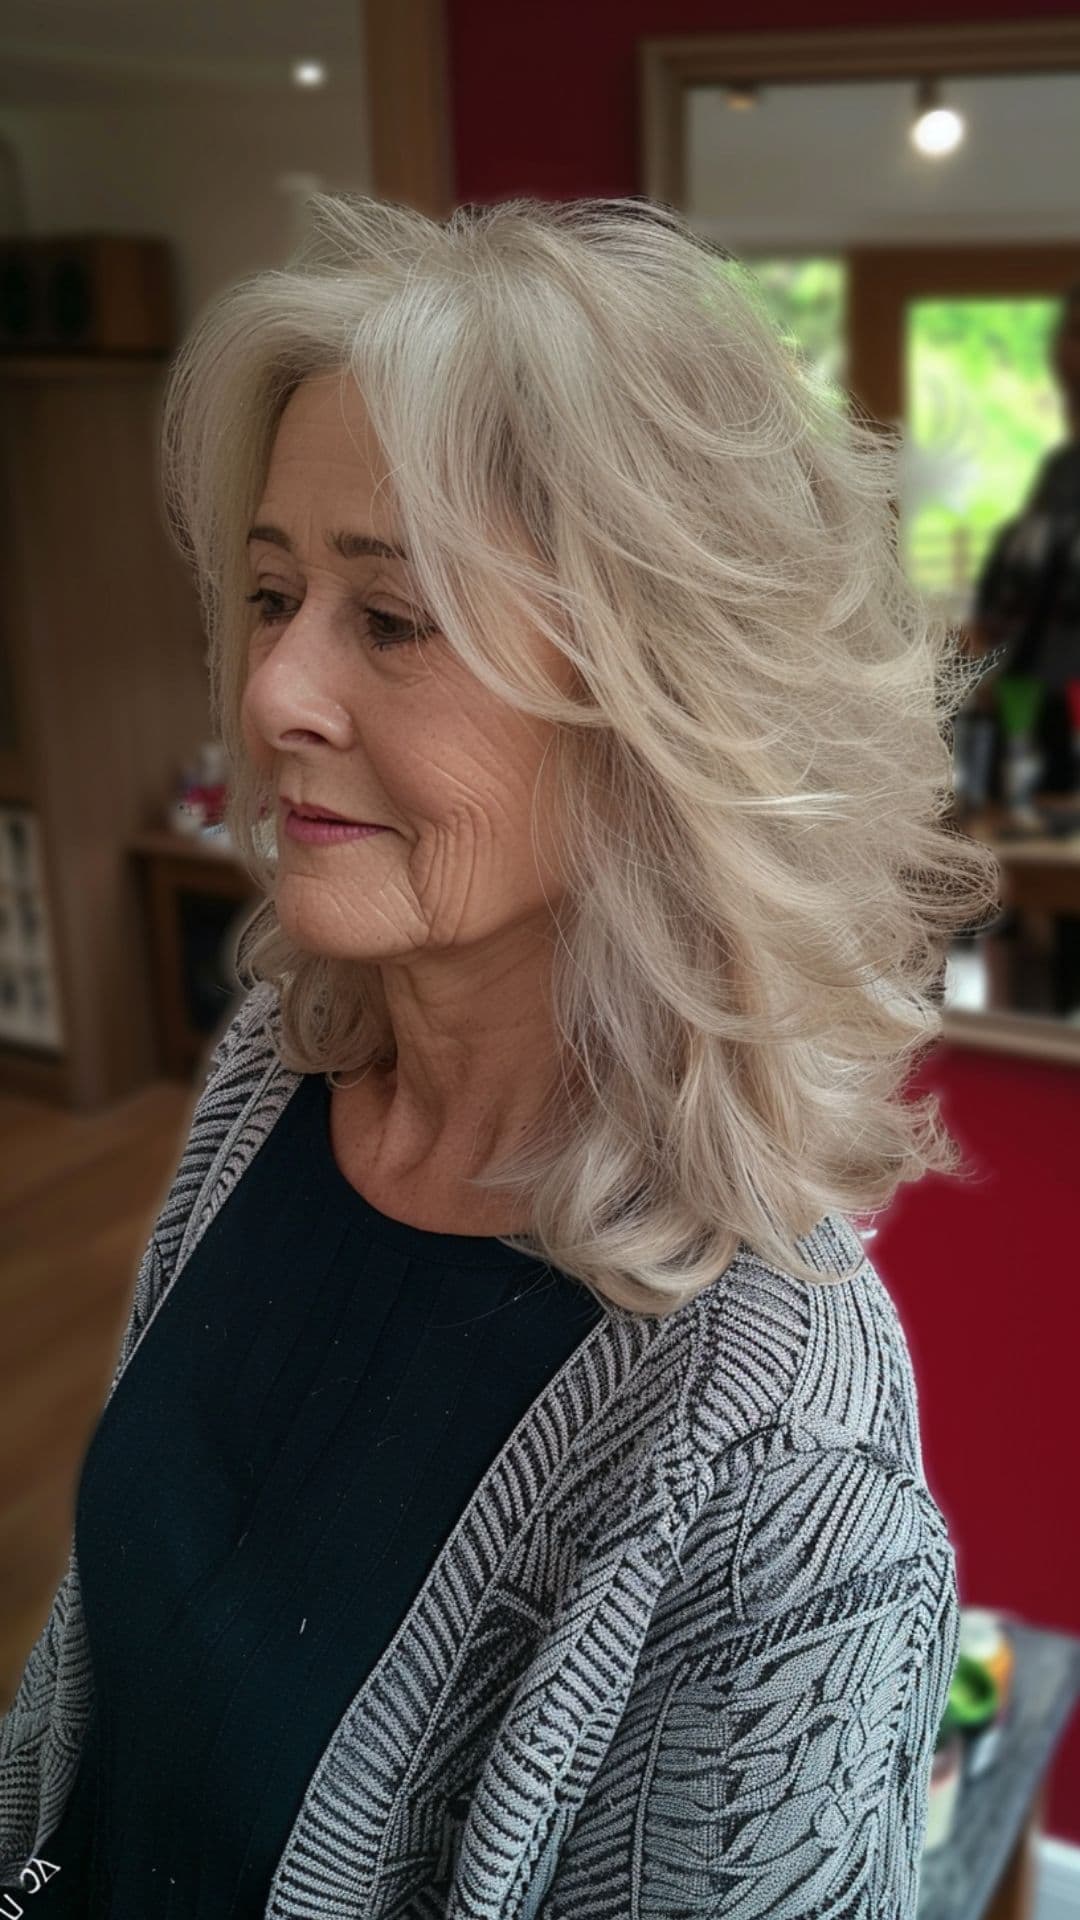 An old woman modelling a textured layered cut.